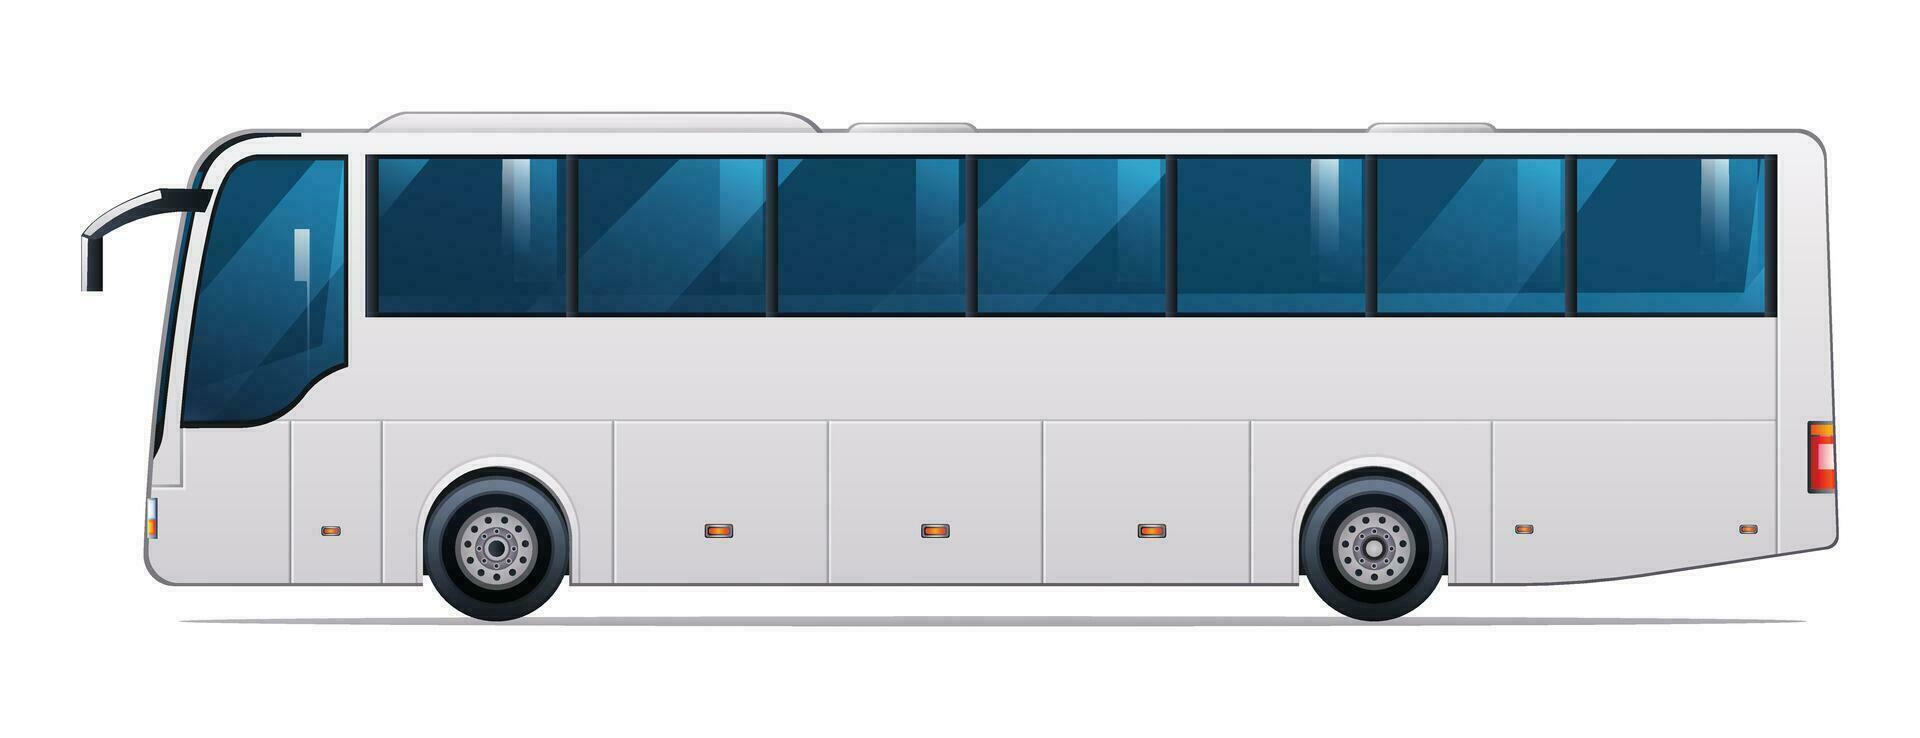 Bus vector illustration. Public transport, side view bus isolated on white background